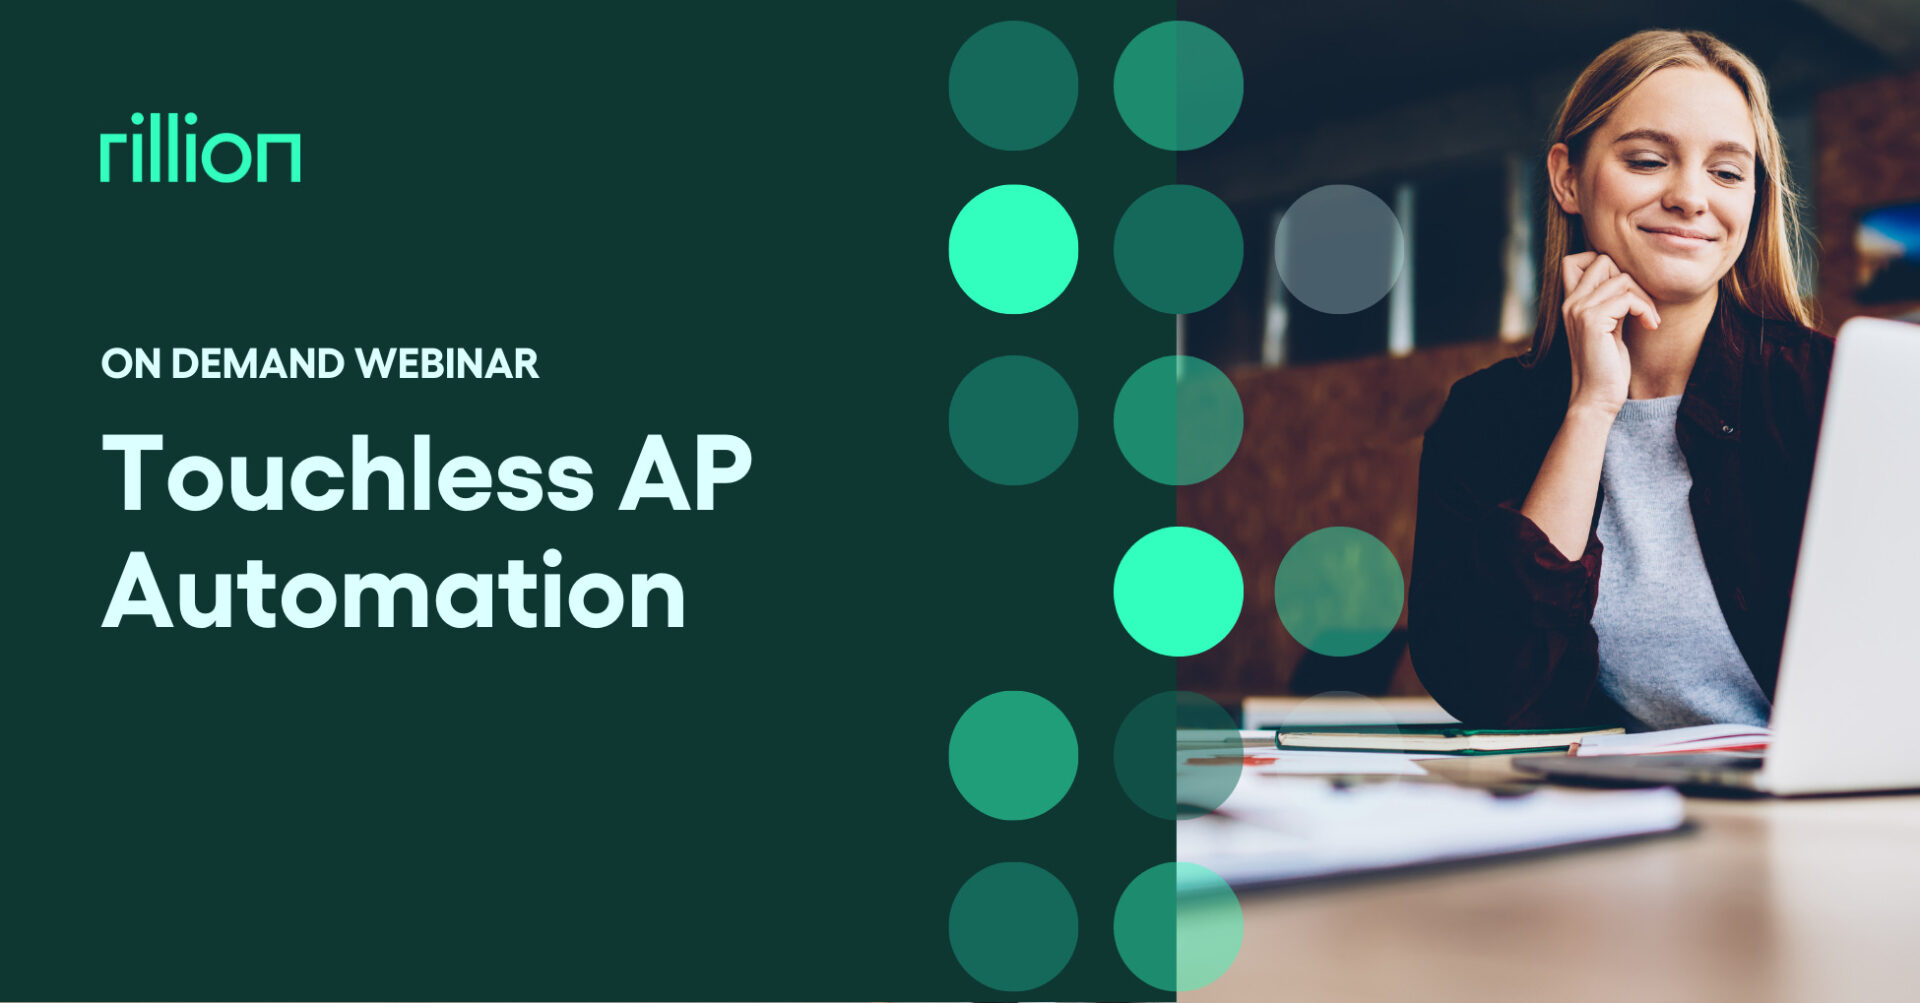 On Demand Webinar: Touchless AP Automation